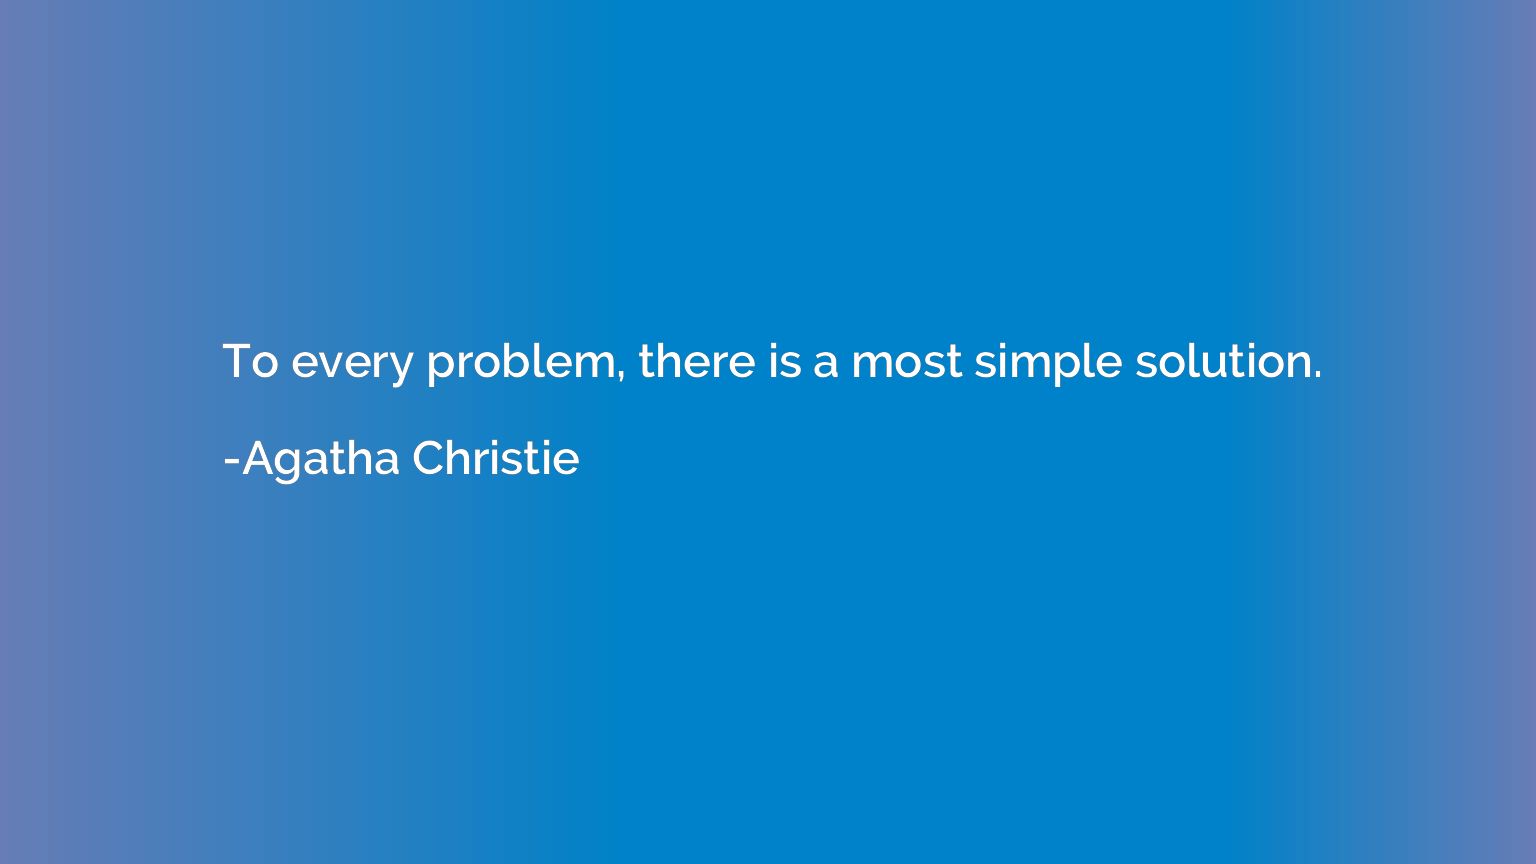 To every problem, there is a most simple solution.